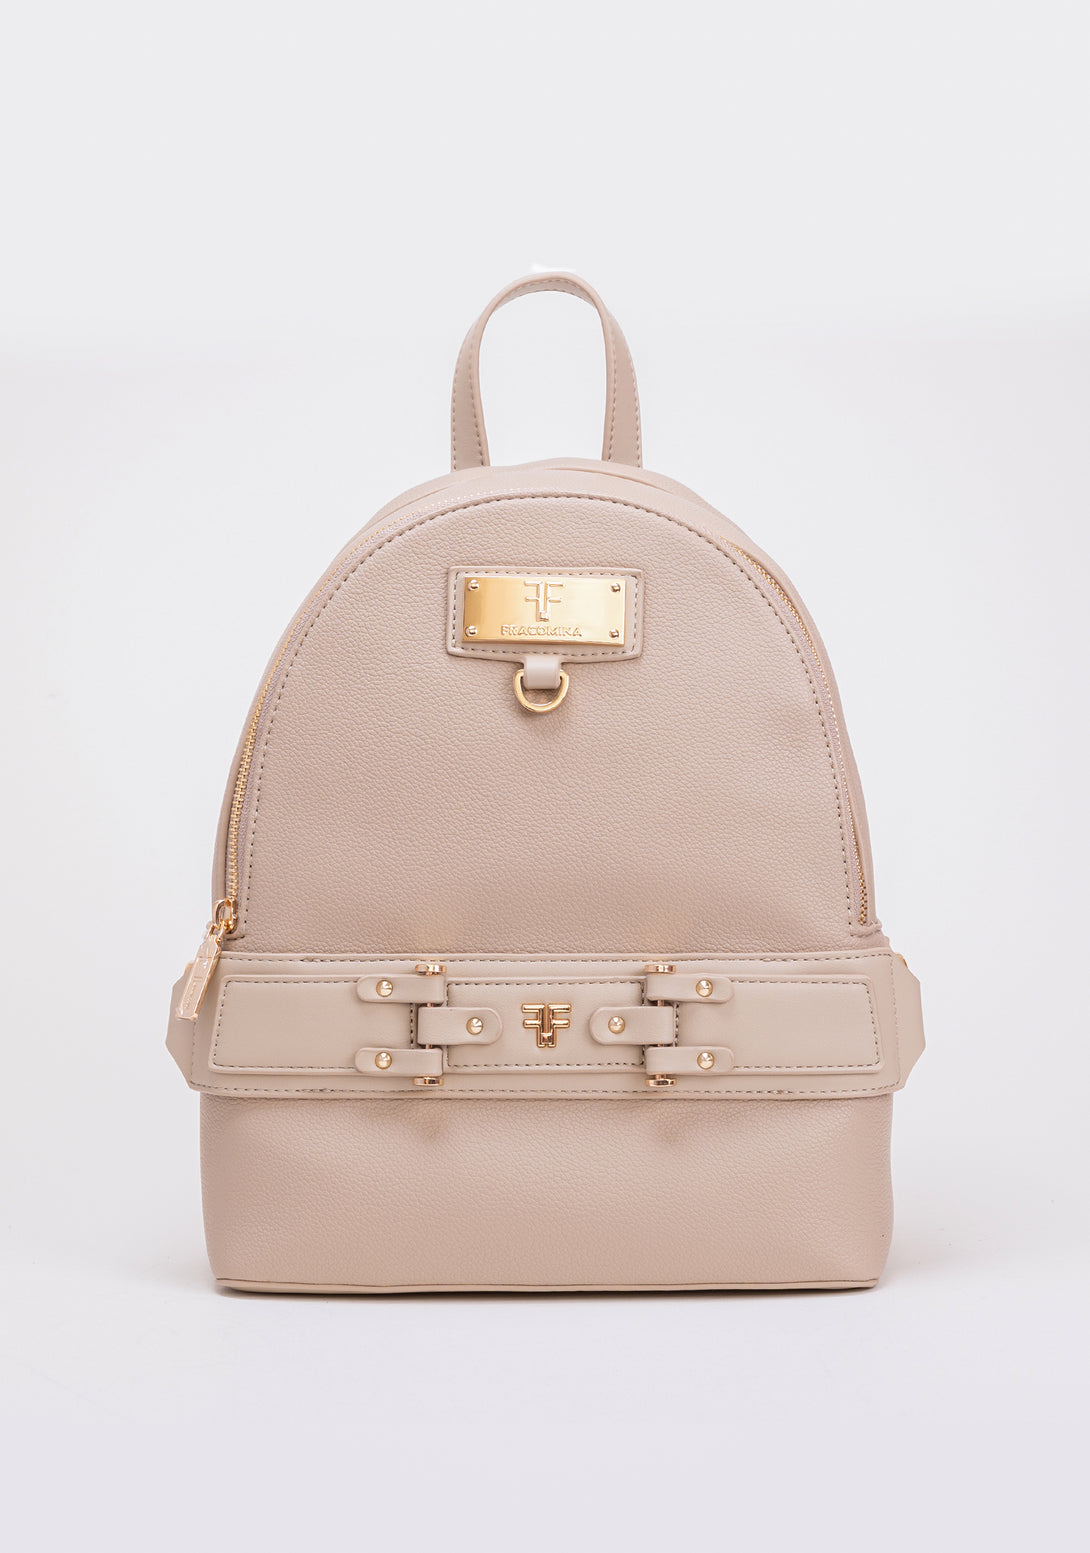 Backpack made in eco leather with metallic details Fracomina FA23WB2002P434Y4-R34-1